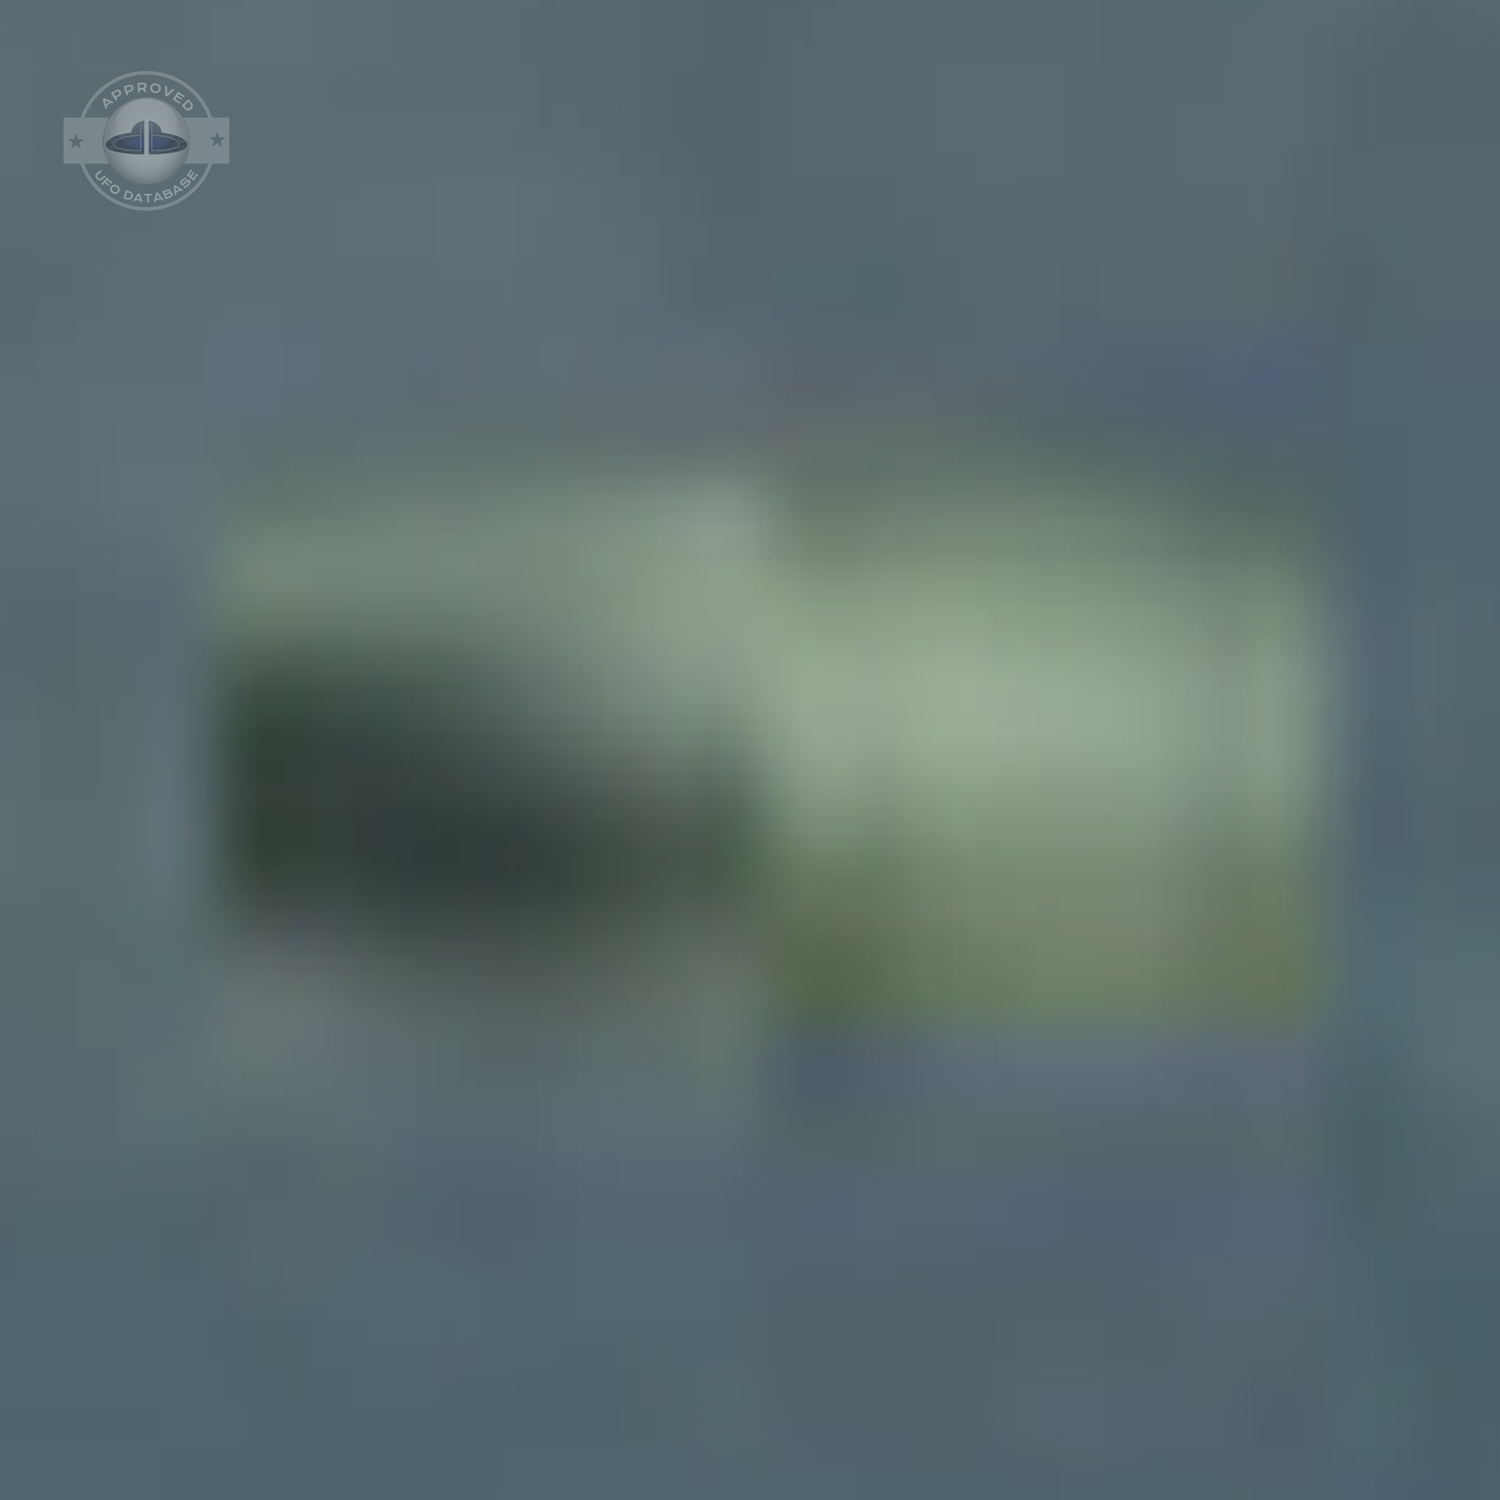 UFO Faster than anything on Earth caught on Video frame | Germany 2011 UFO Picture #213-6